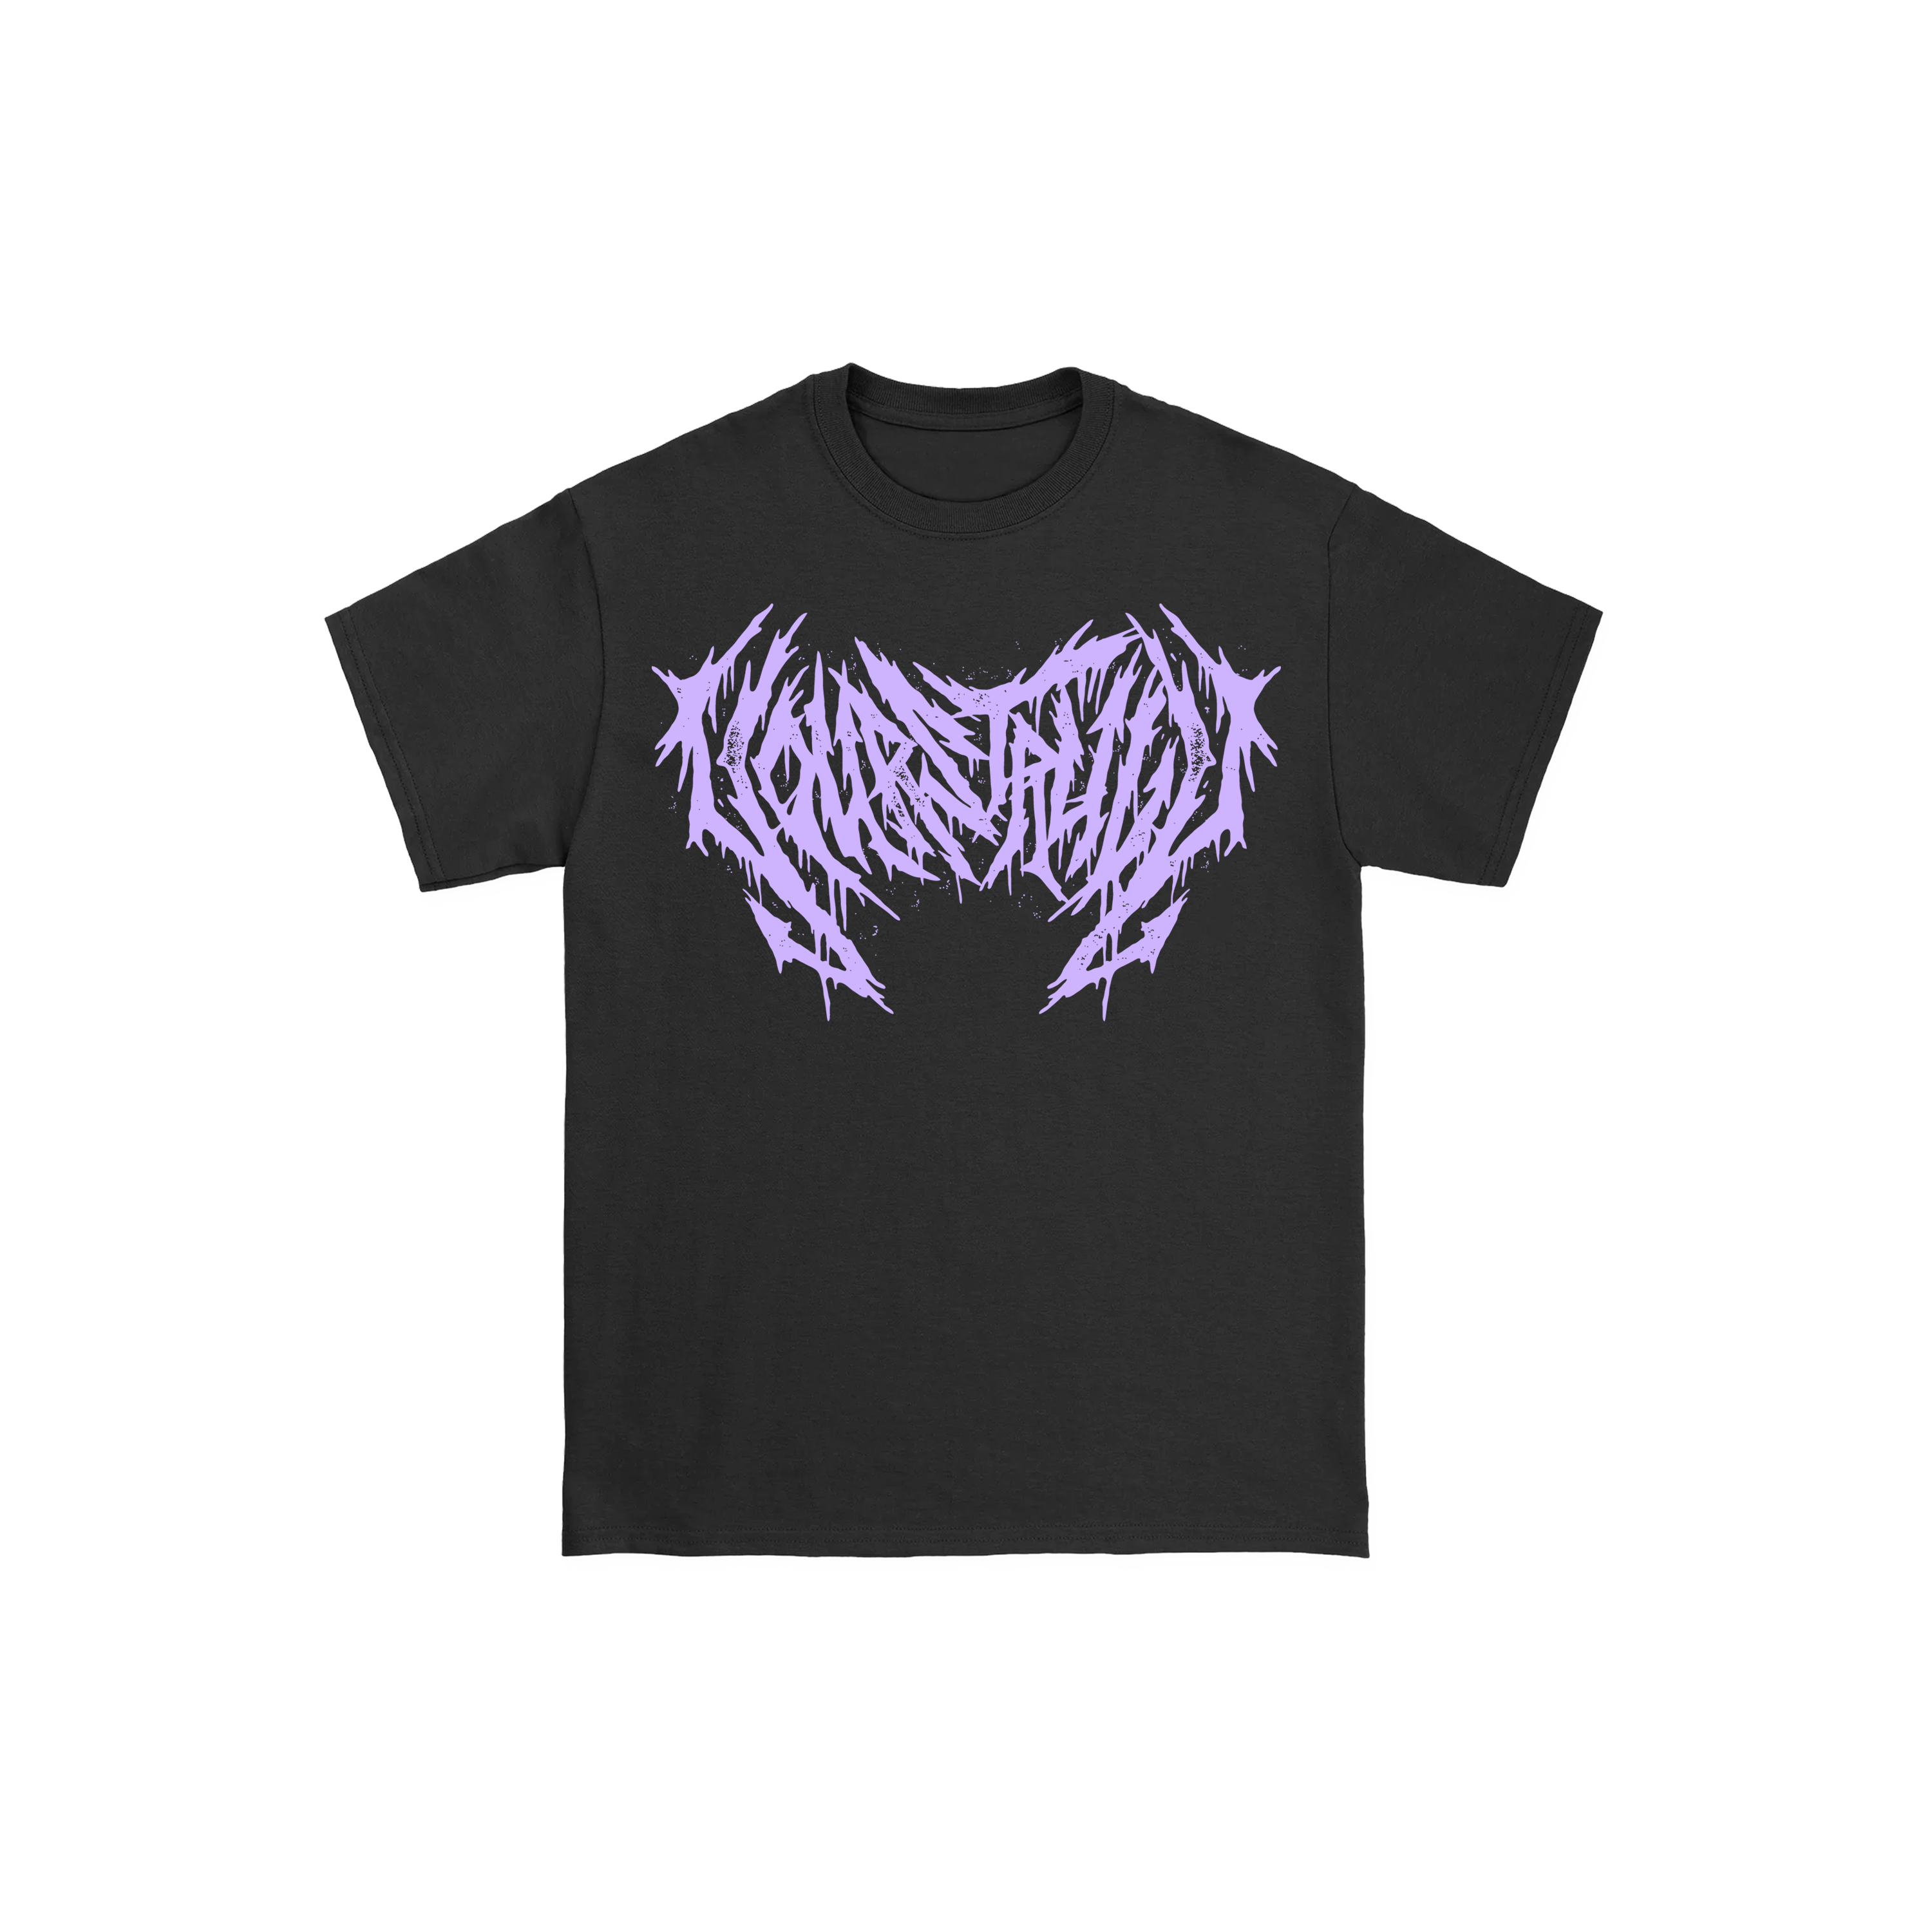 Yours Truly - Metal T-Shirt